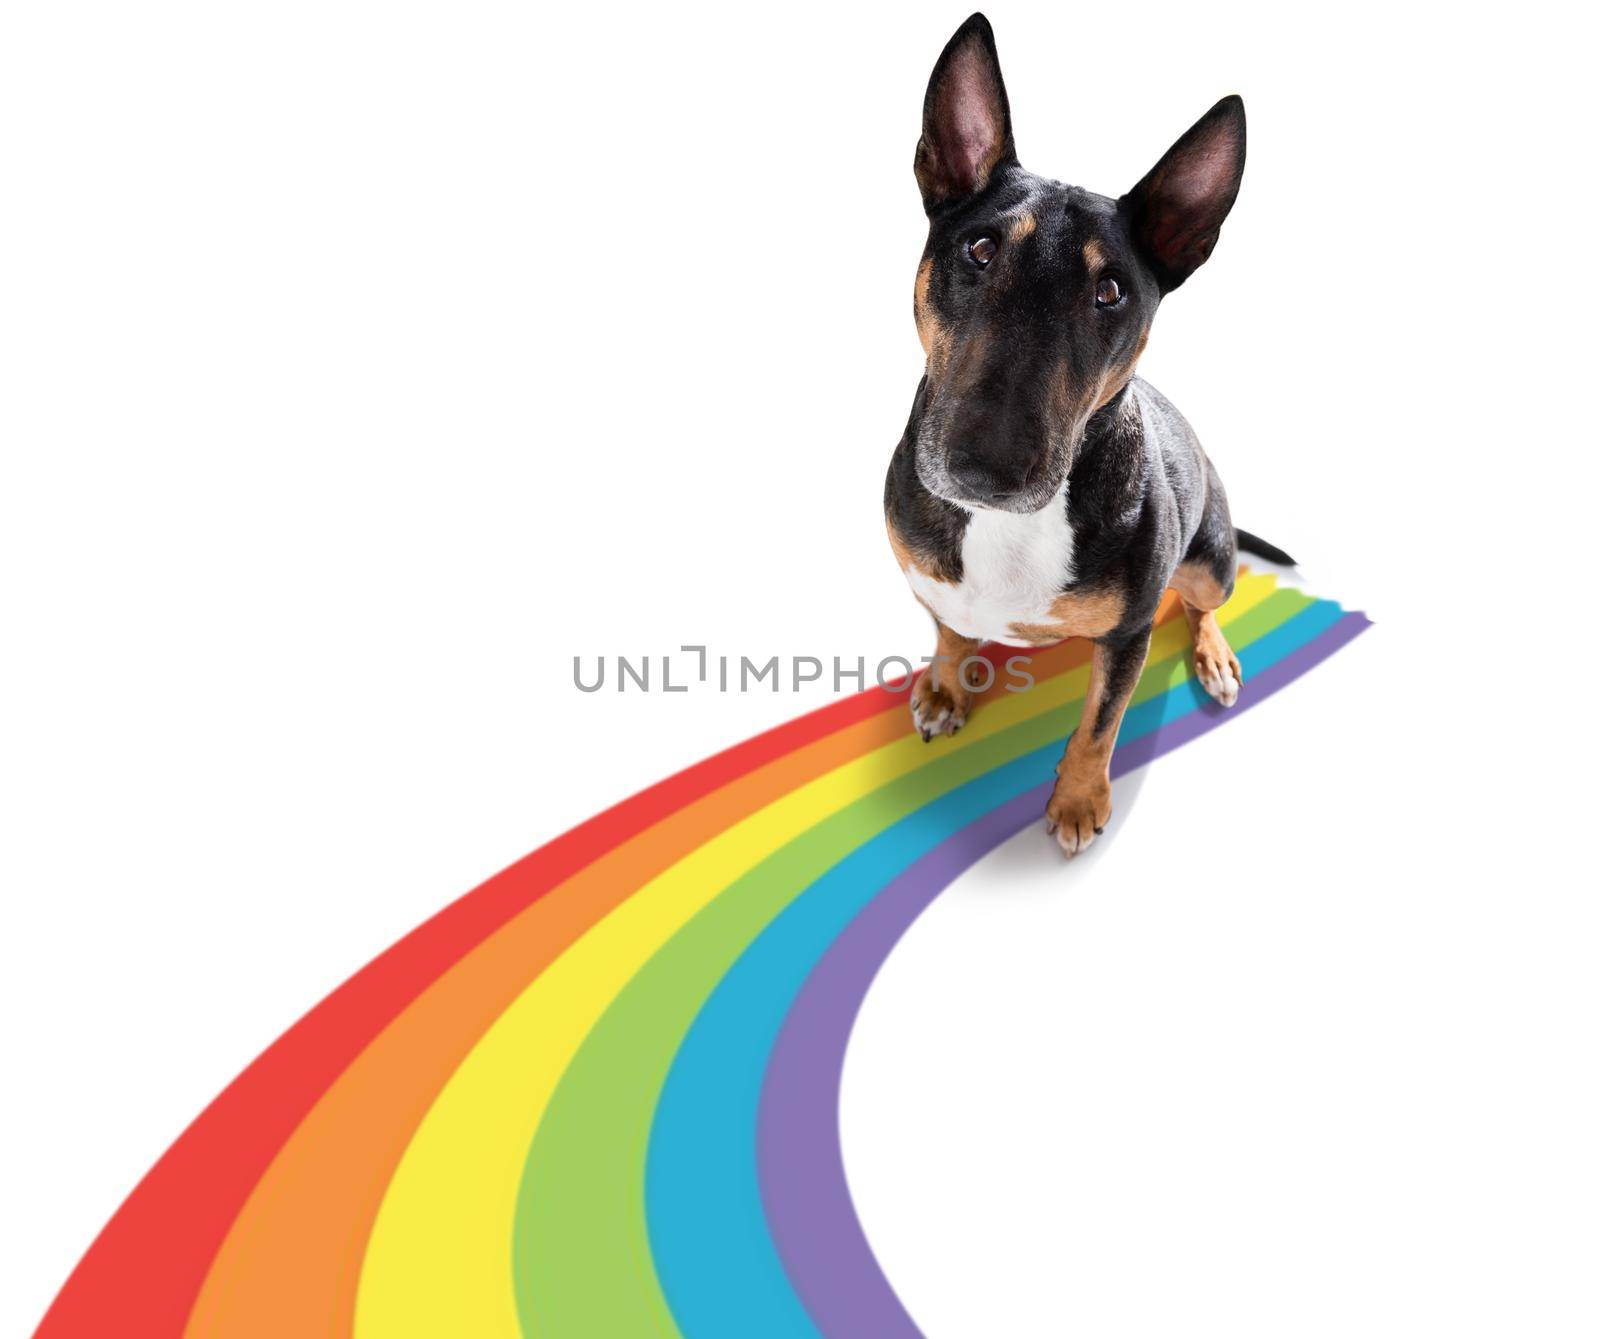 fairy  funny gay dog proud of human rights waving  with lgbt rainbow flag , isolated on white background